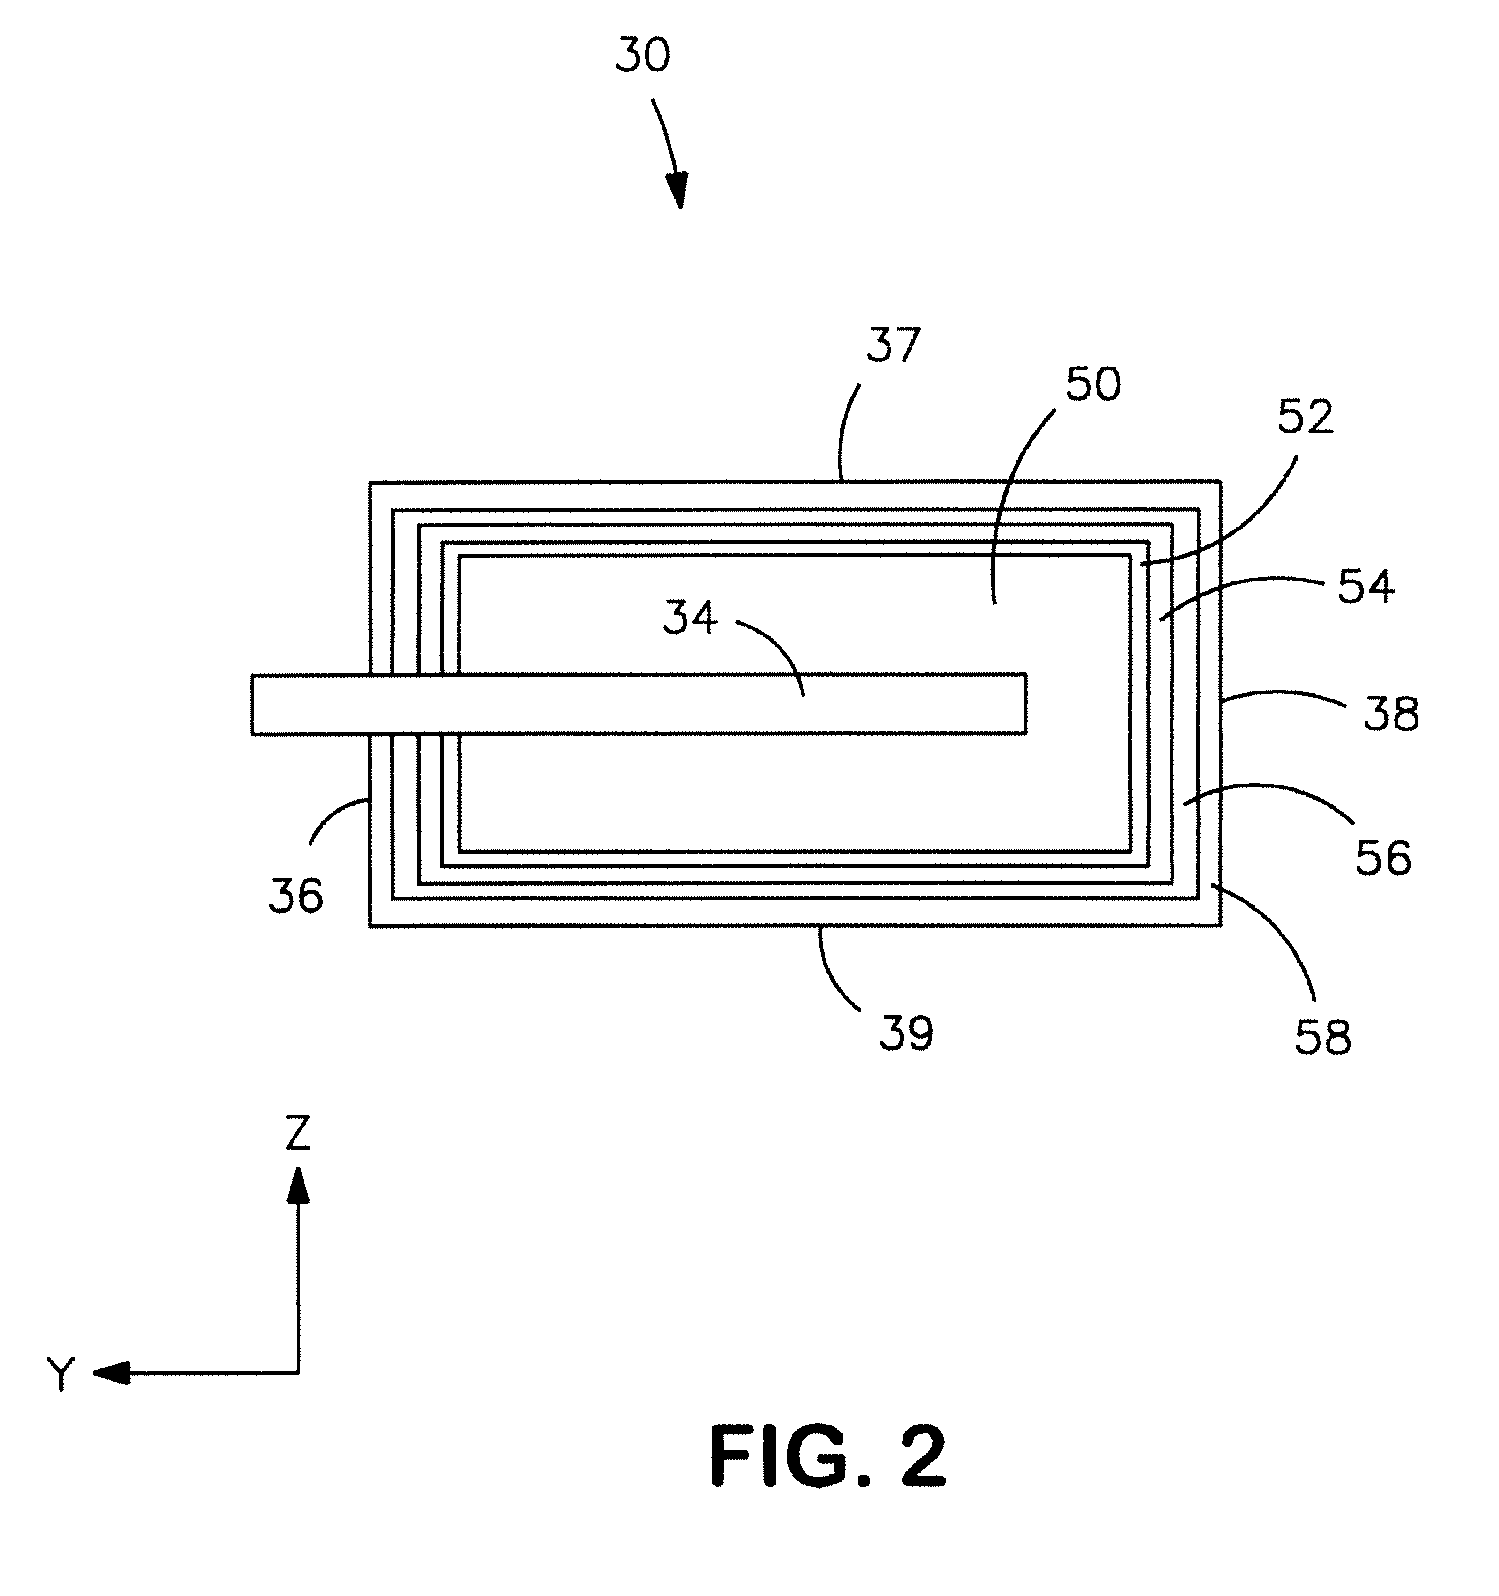 Sintered anode pellet treated with a surfactant for use in an electrolytic capacitor